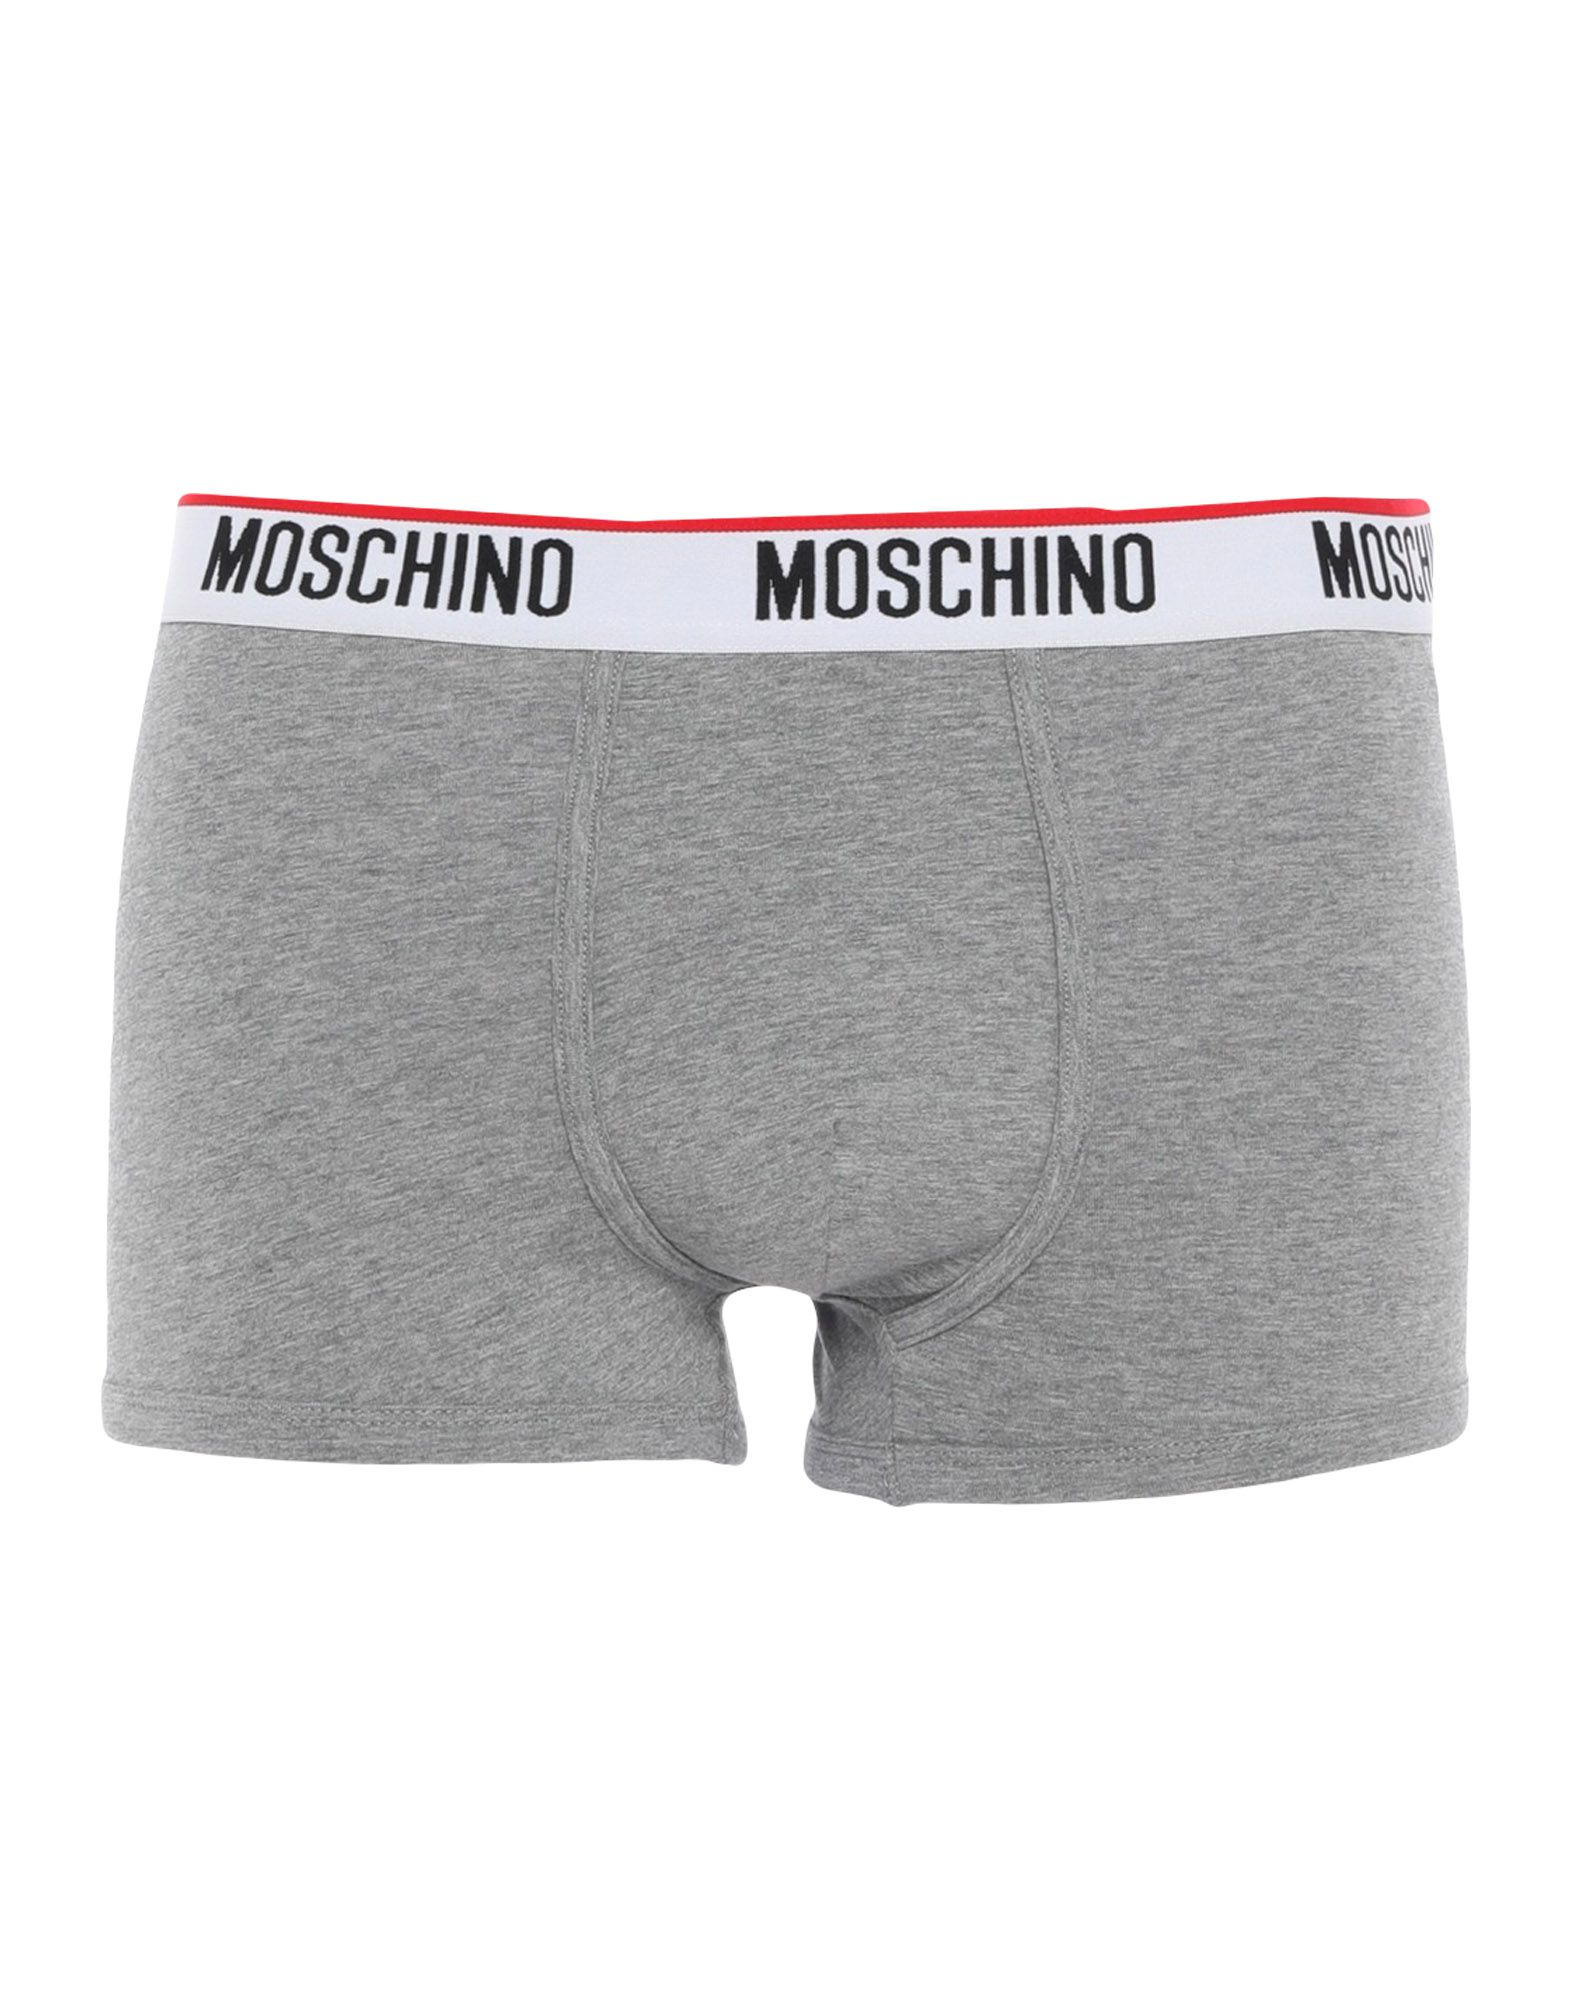 MOSCHINO BOXERS,48214005LM 3